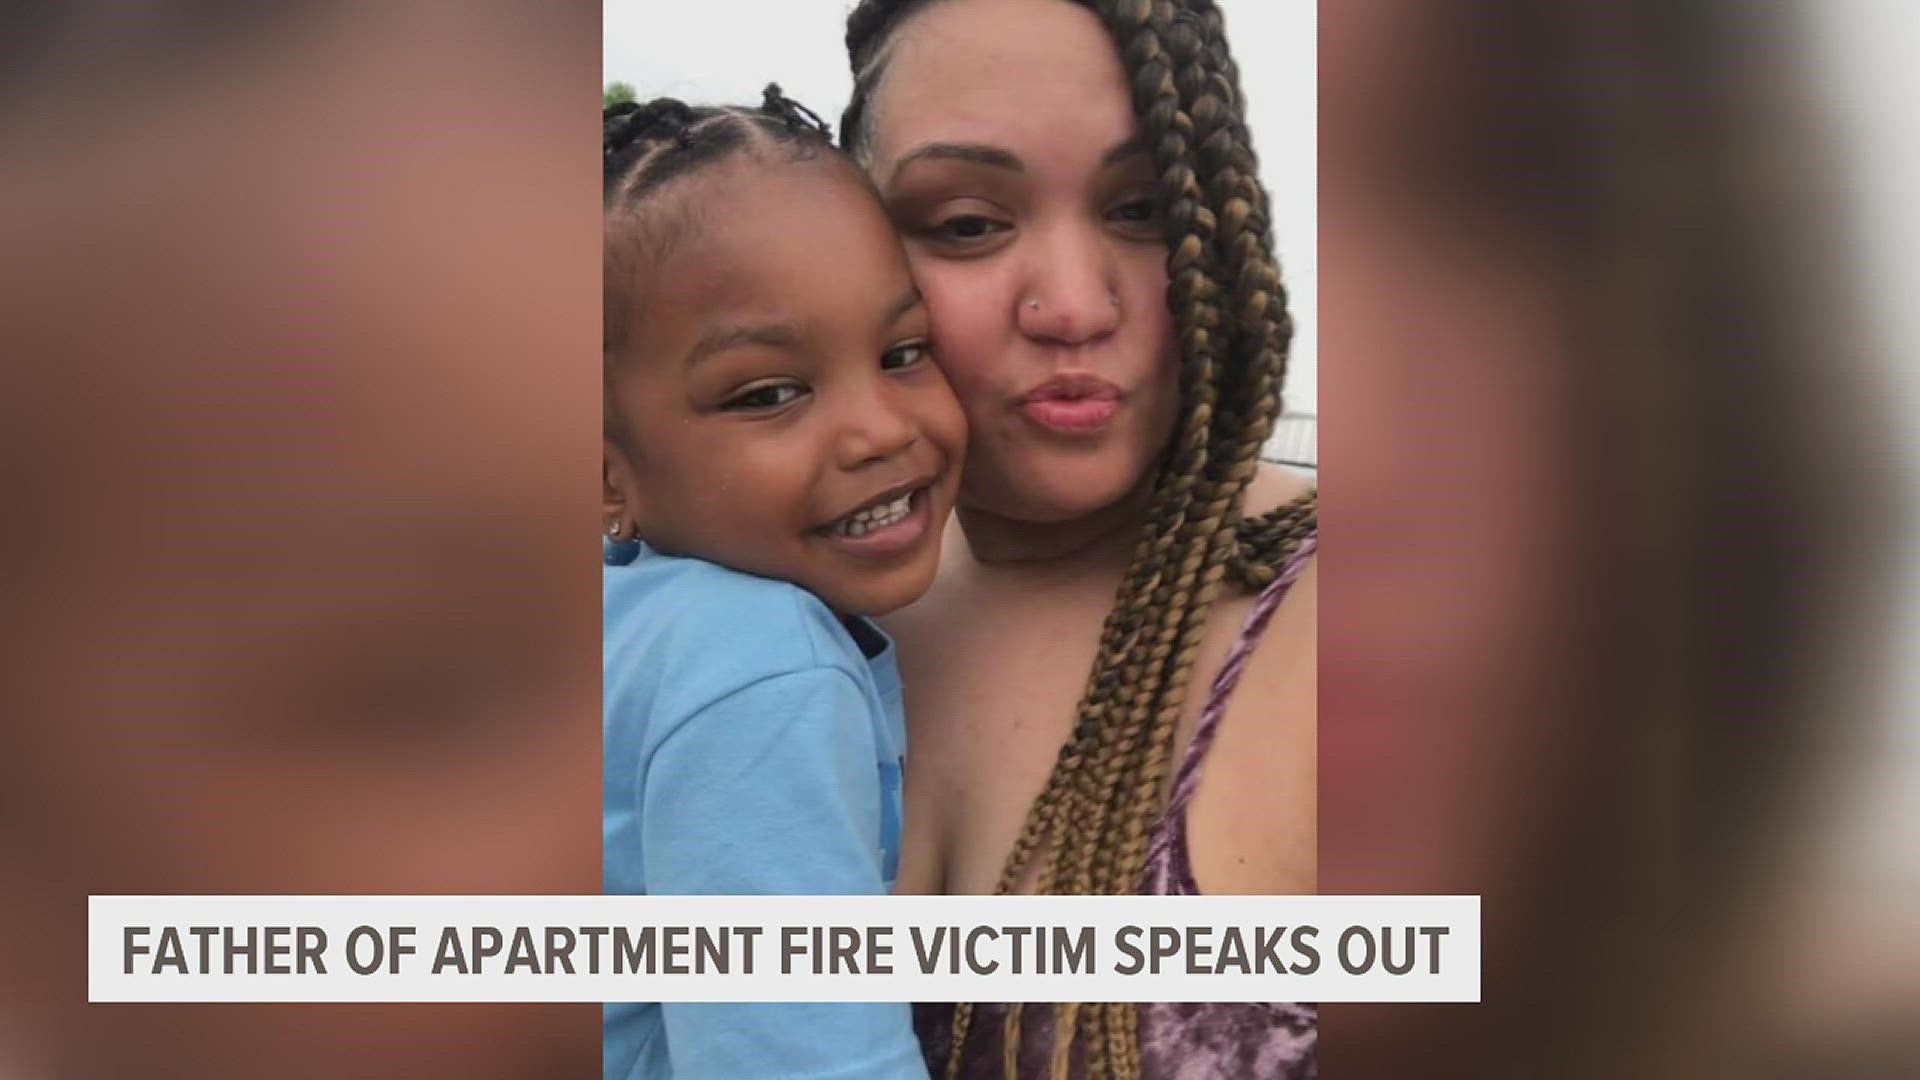 Marissa Lard lost her life in an apartment fire the day before Christmas Eve. Now, her father is attempting to gain guardianship of his critically-injured grandson.